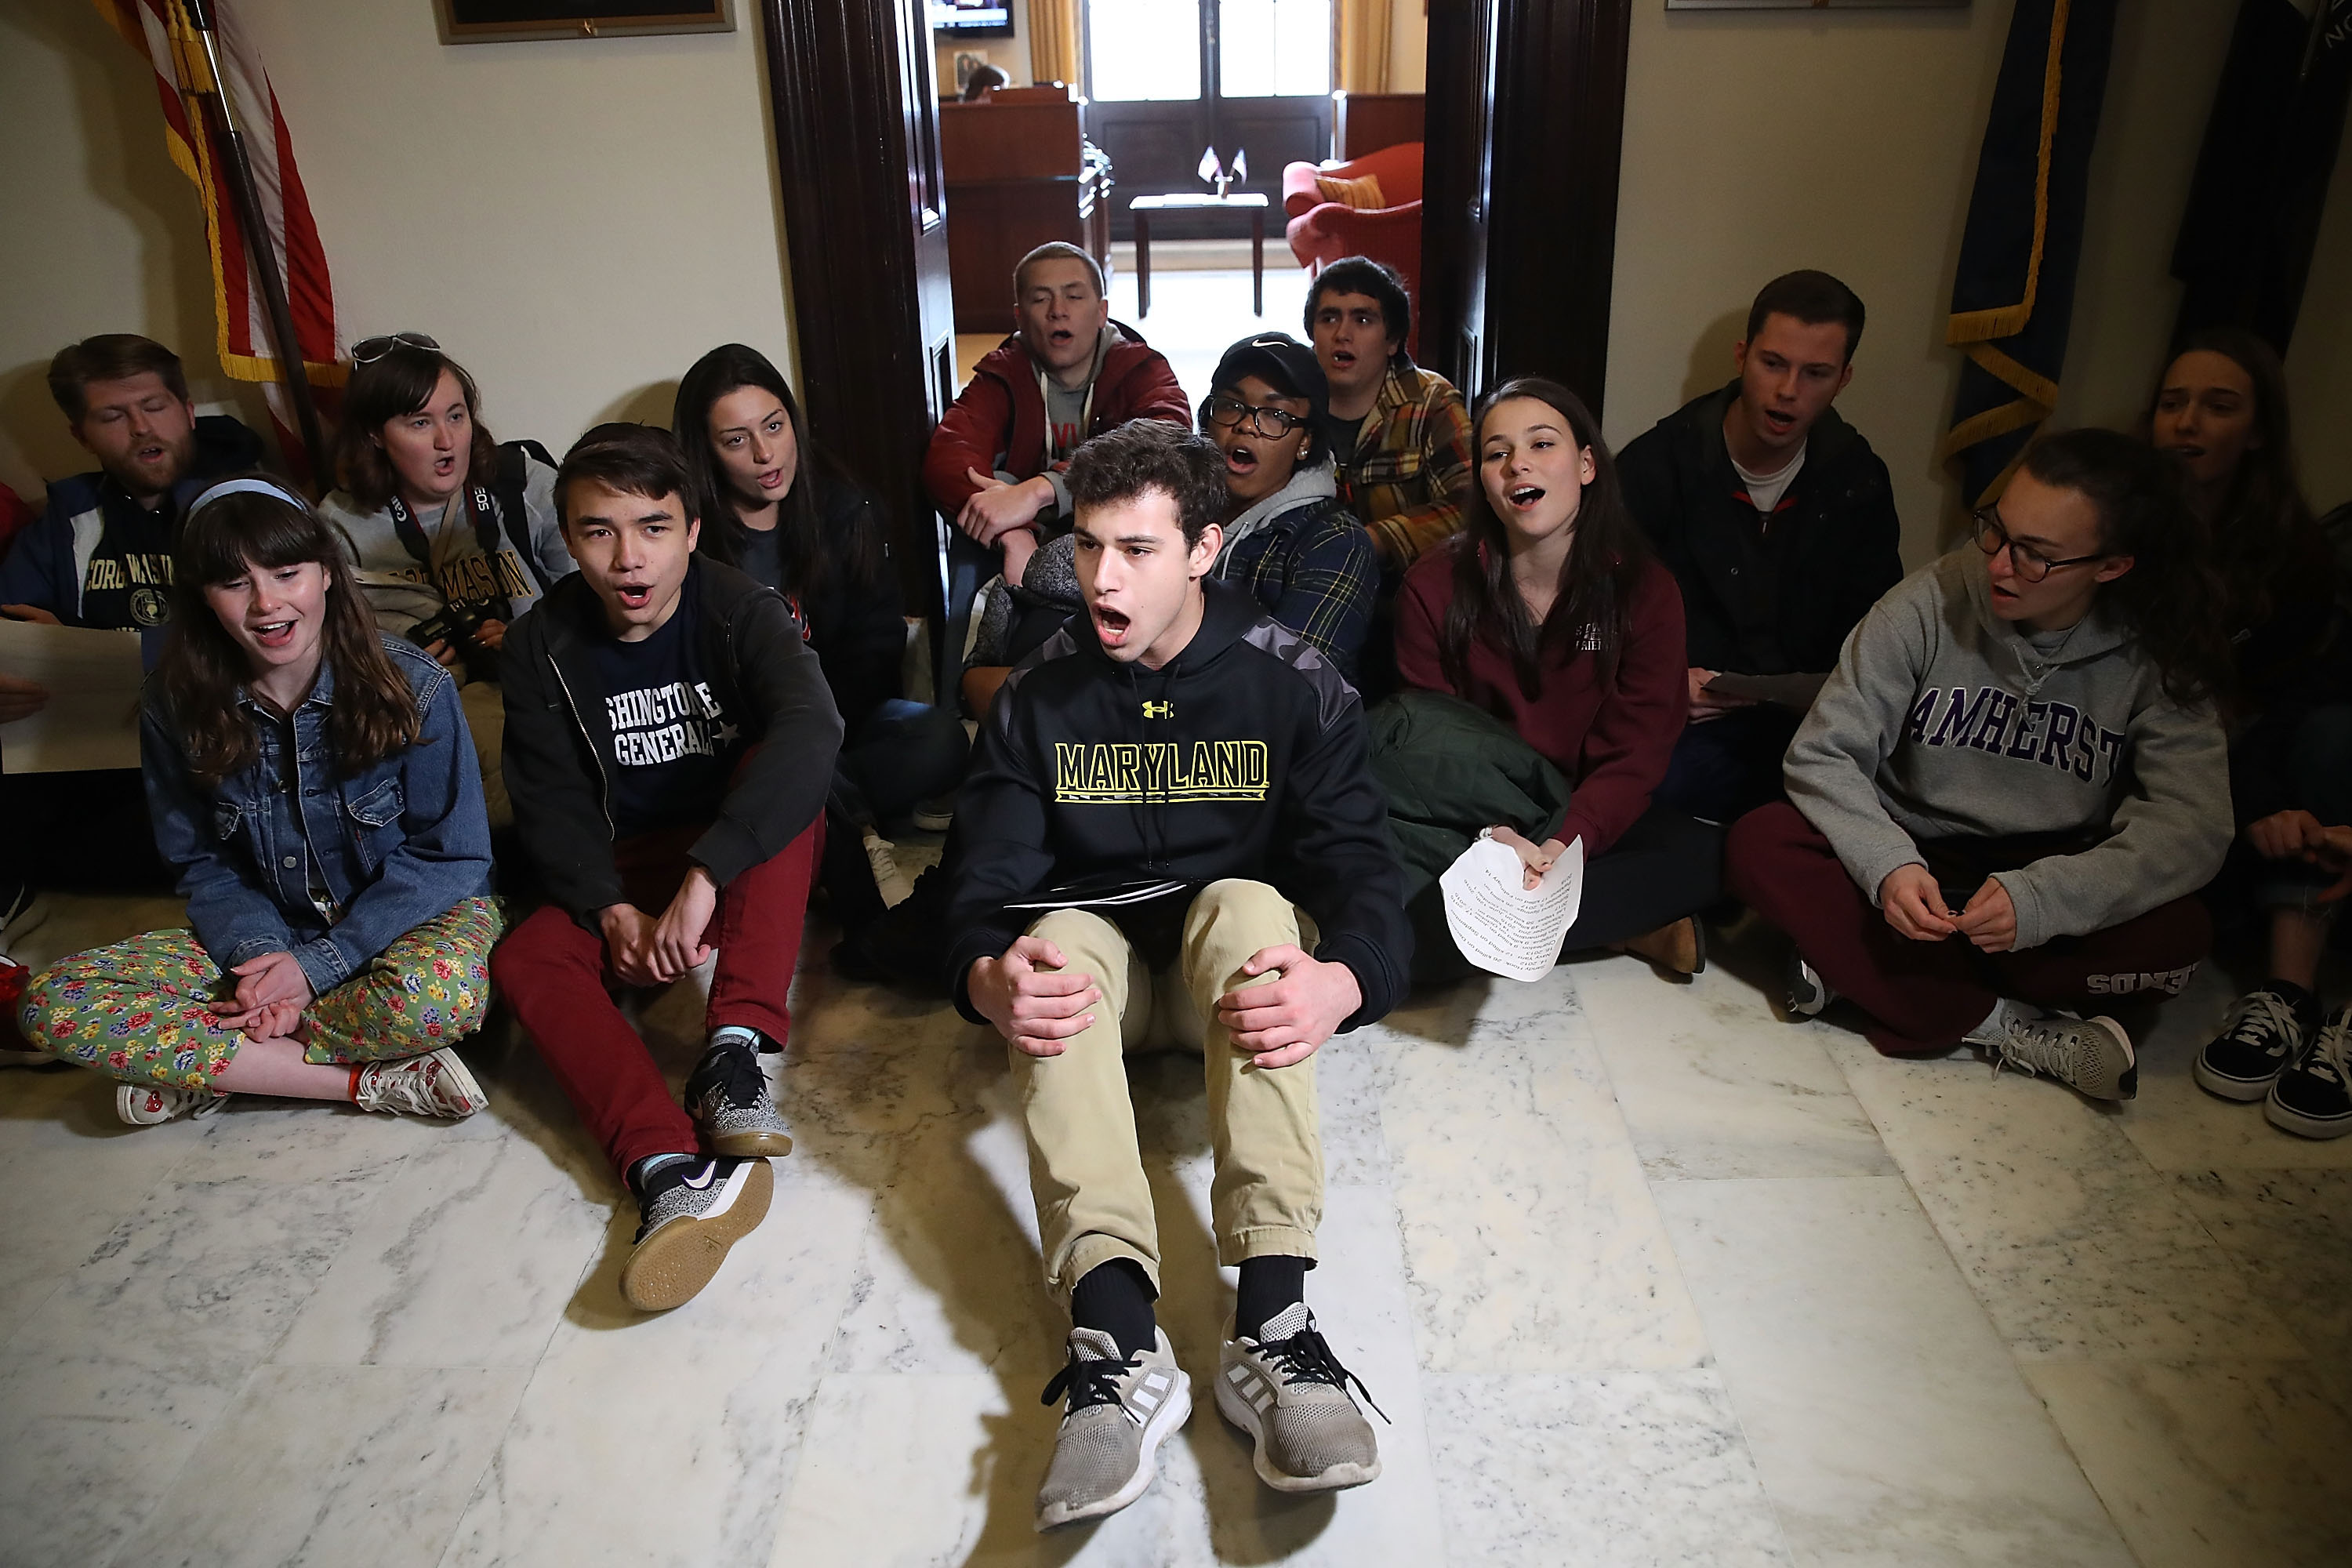 Today, students all over the country took part in 17-minute protests, one minute for each person who died in the high school massacre in Parkland, Florida. In this photo, students protest in front of Senate Majority Leader Mitch McConnell's (R-KY) office to urge Congress into changing gun laws on March 7 in Washington, D.C. (Mark Wilson/Getty Images)